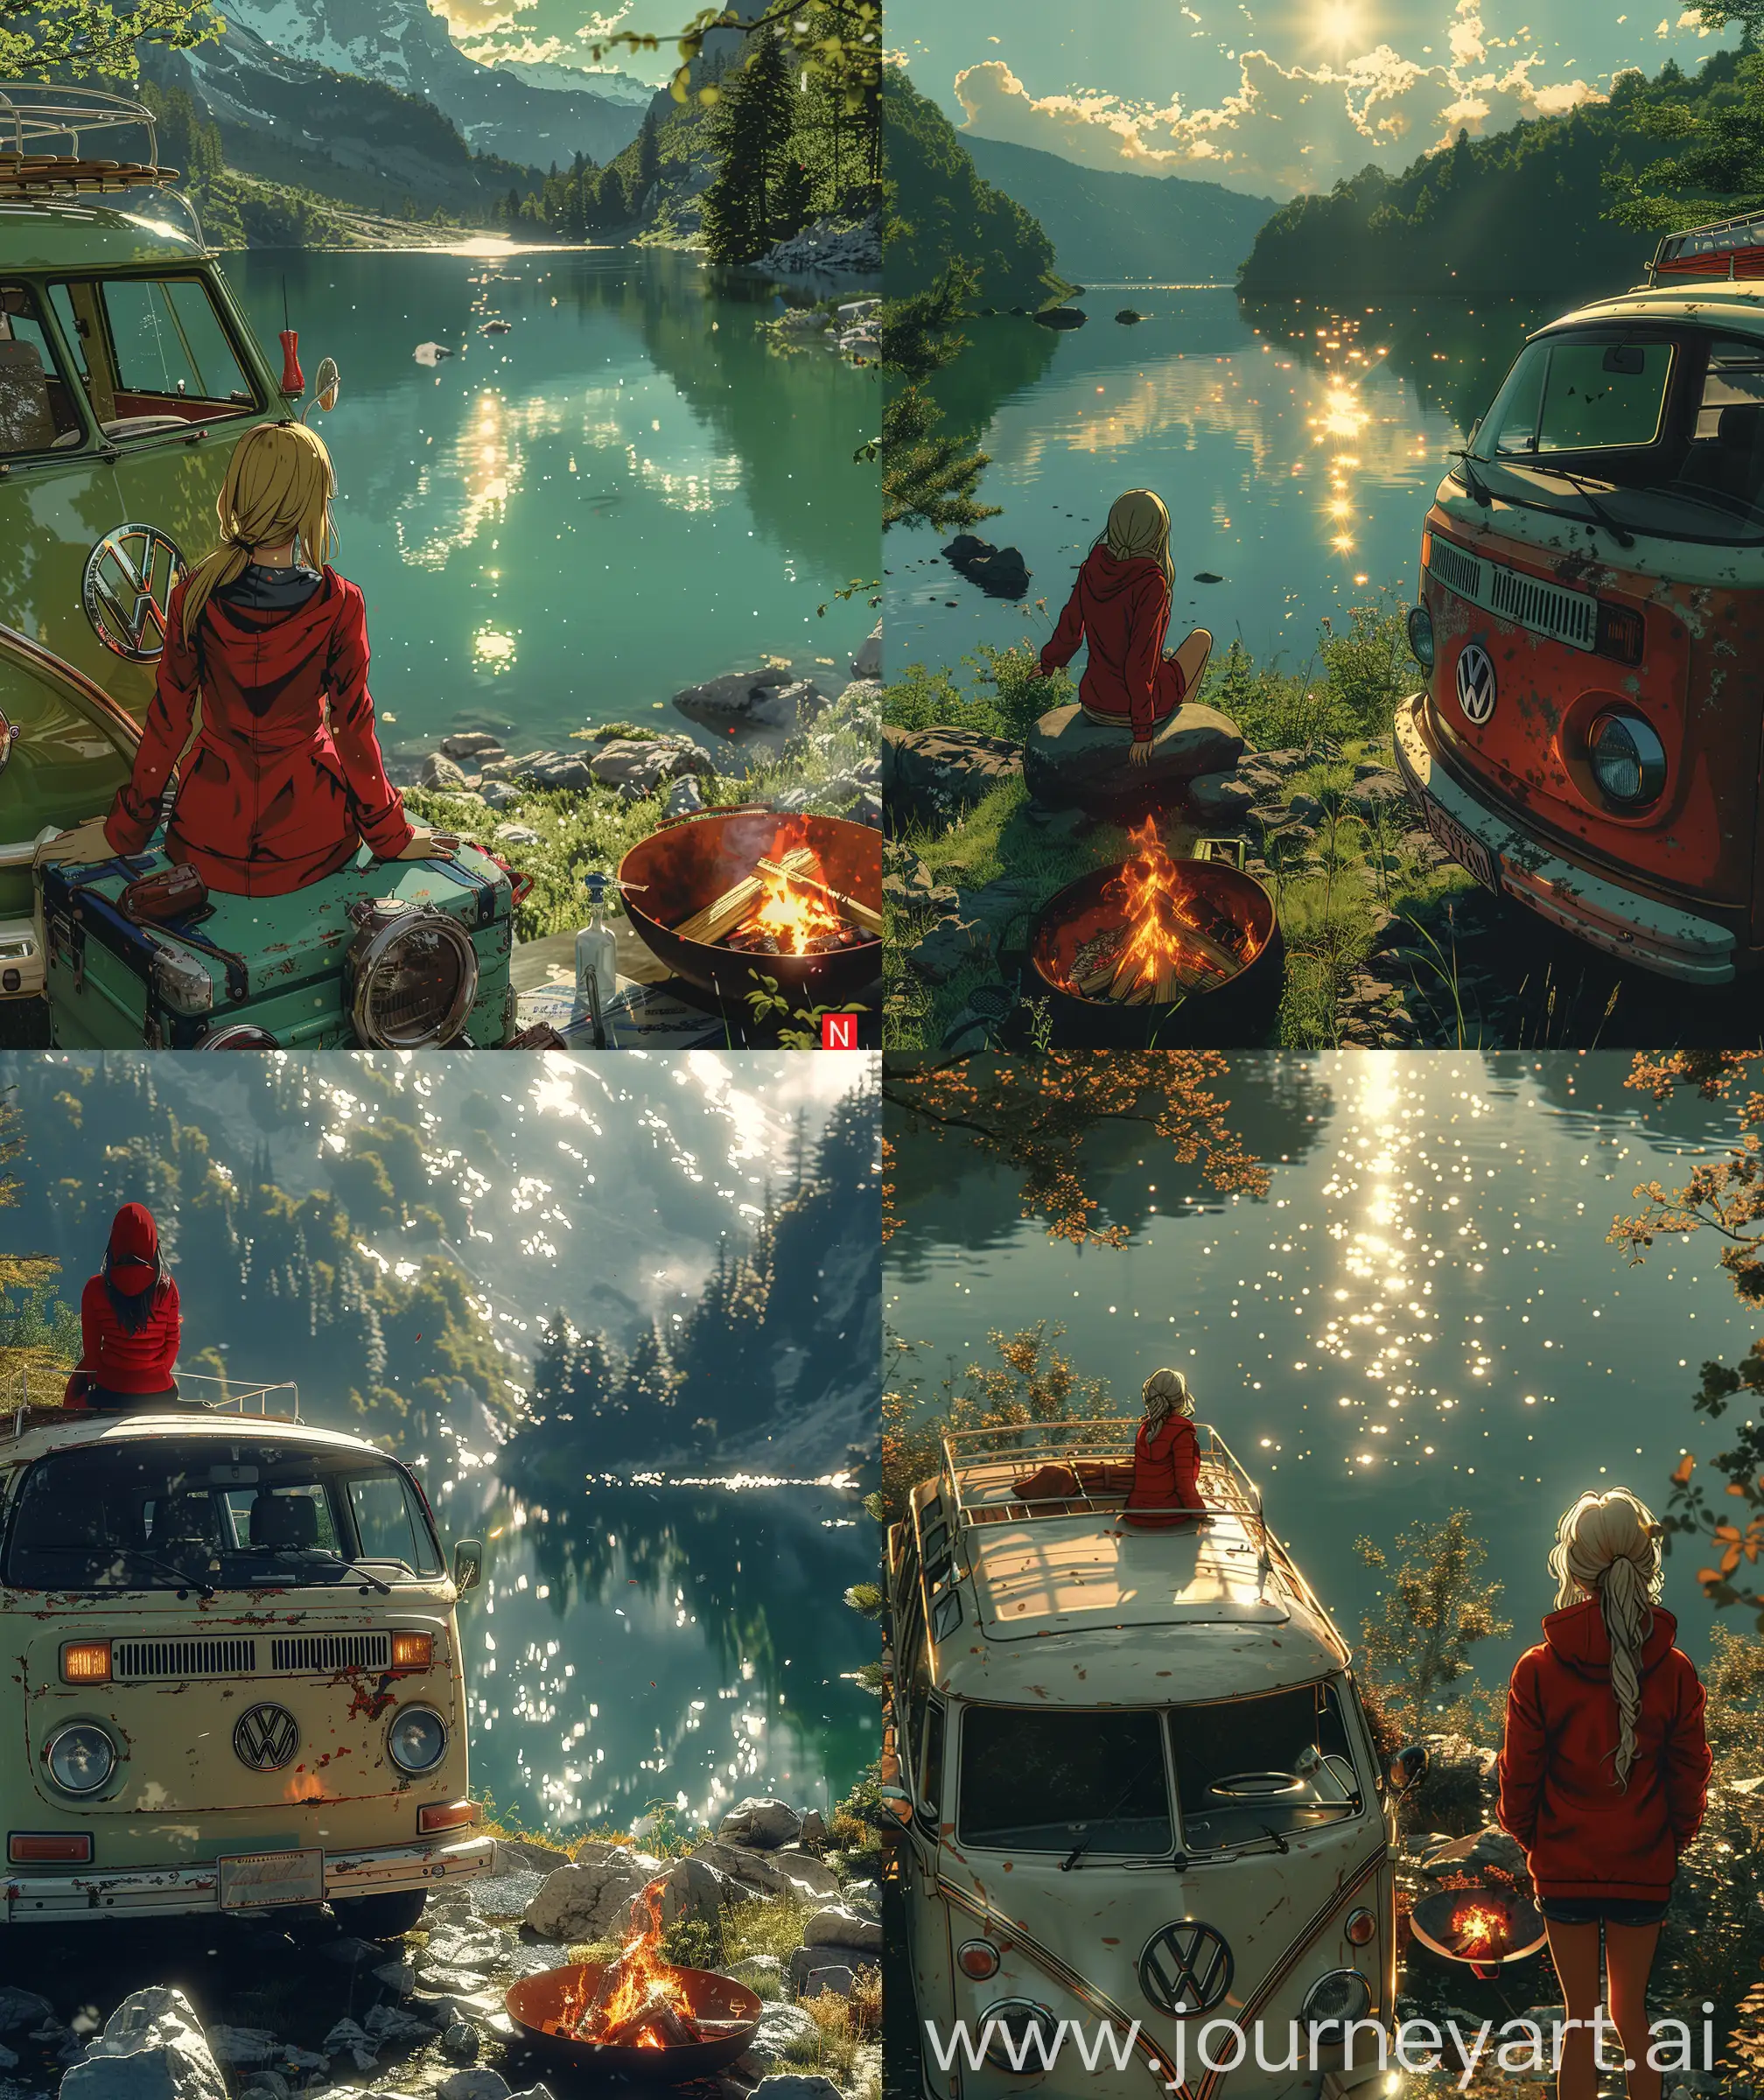 Beautiful anime scenery, illustration , direct front facade Volkswagen camping van, woman in red jacket sit on van rooftop, looking at lake ,  fire pit besides van, view is amazing, glistening sunlight over lake water, beautiful vintage anime illustration scenery, ultra hd, High quality resolution, day time, sharp details,no blurry image , no hyperrealistic --ar 27:32 --s 600